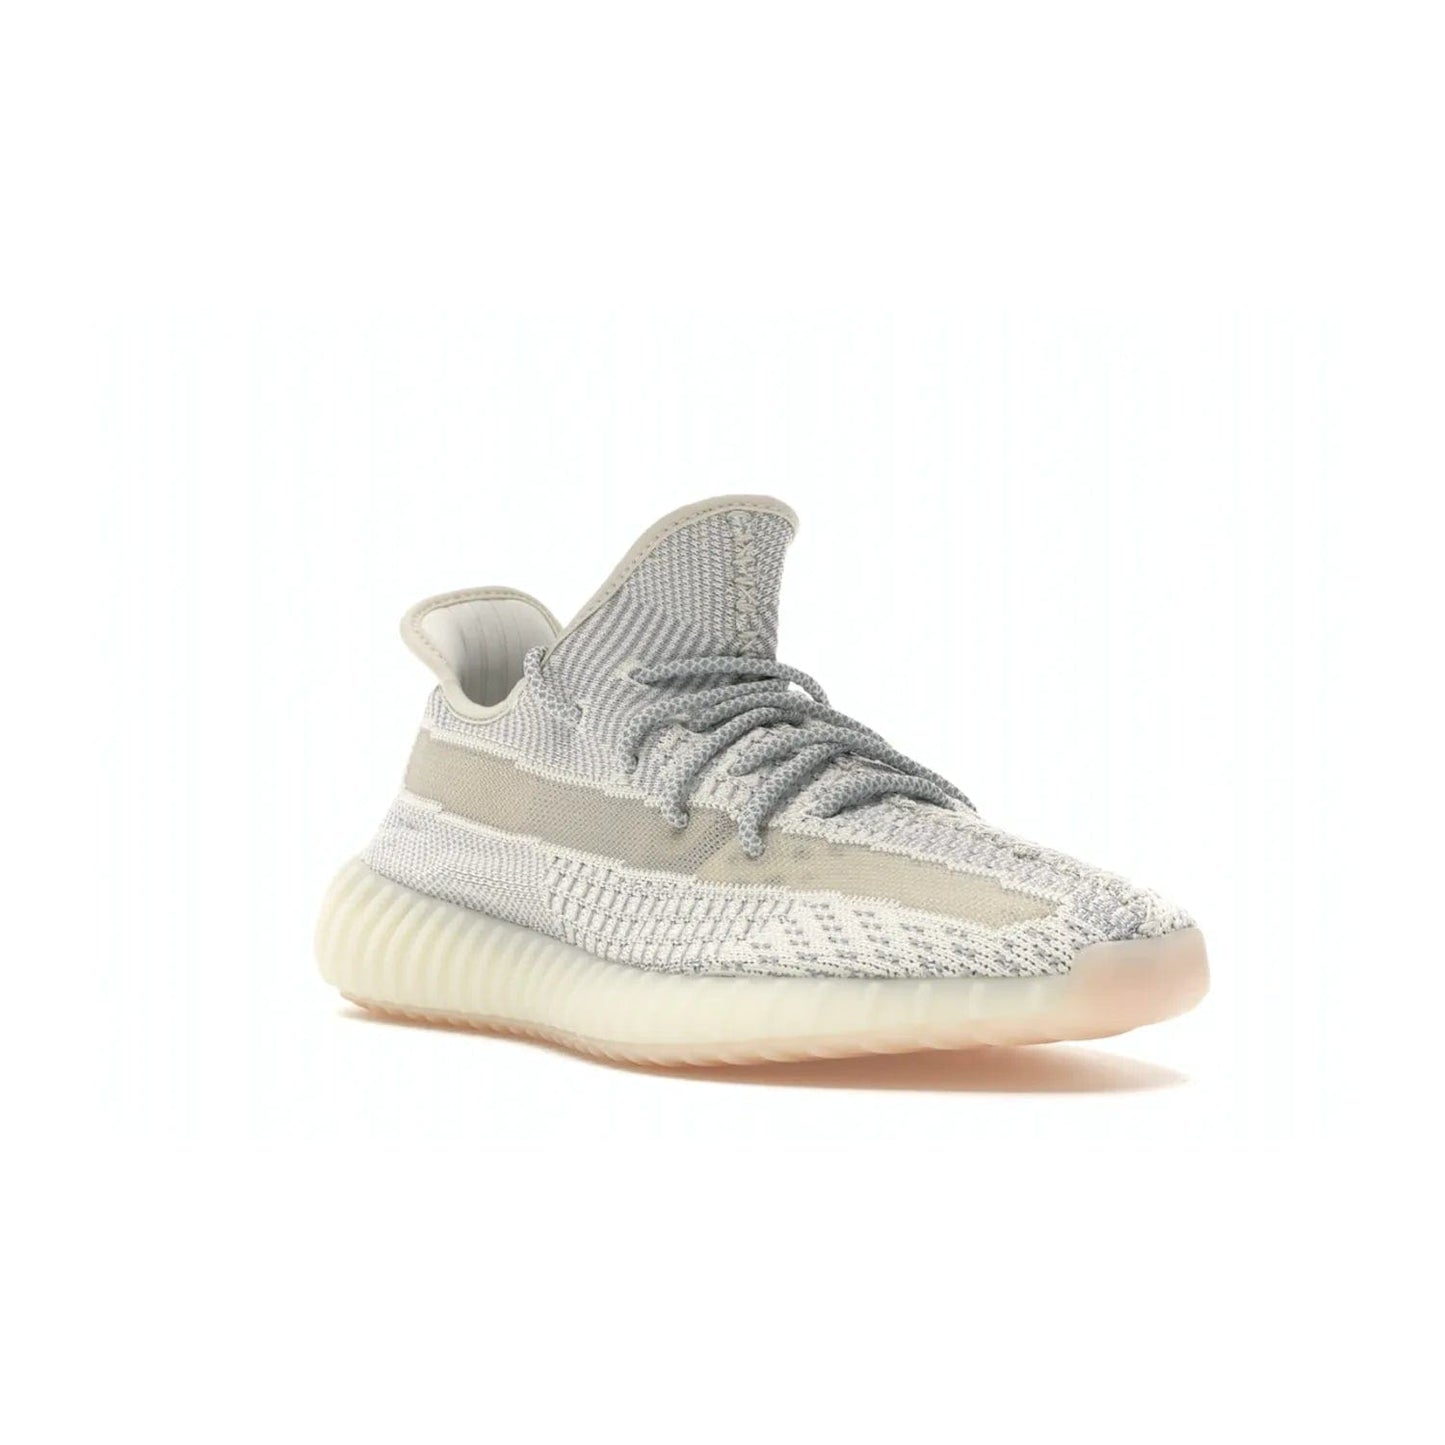 adidas Yeezy Boost 350 V2 Lundmark (Non Reflective) - Image 6 - Only at www.BallersClubKickz.com - Shop the exclusive adidas Yeezy Boost 350 V2 Lundmark with a subtle summer color, mesh upper, white-to-cream transitional midsole, light tan outsole, and pink middle stripe. Comfort and style come together in this perfect summer 350 V2. Released on July 11, 2019.